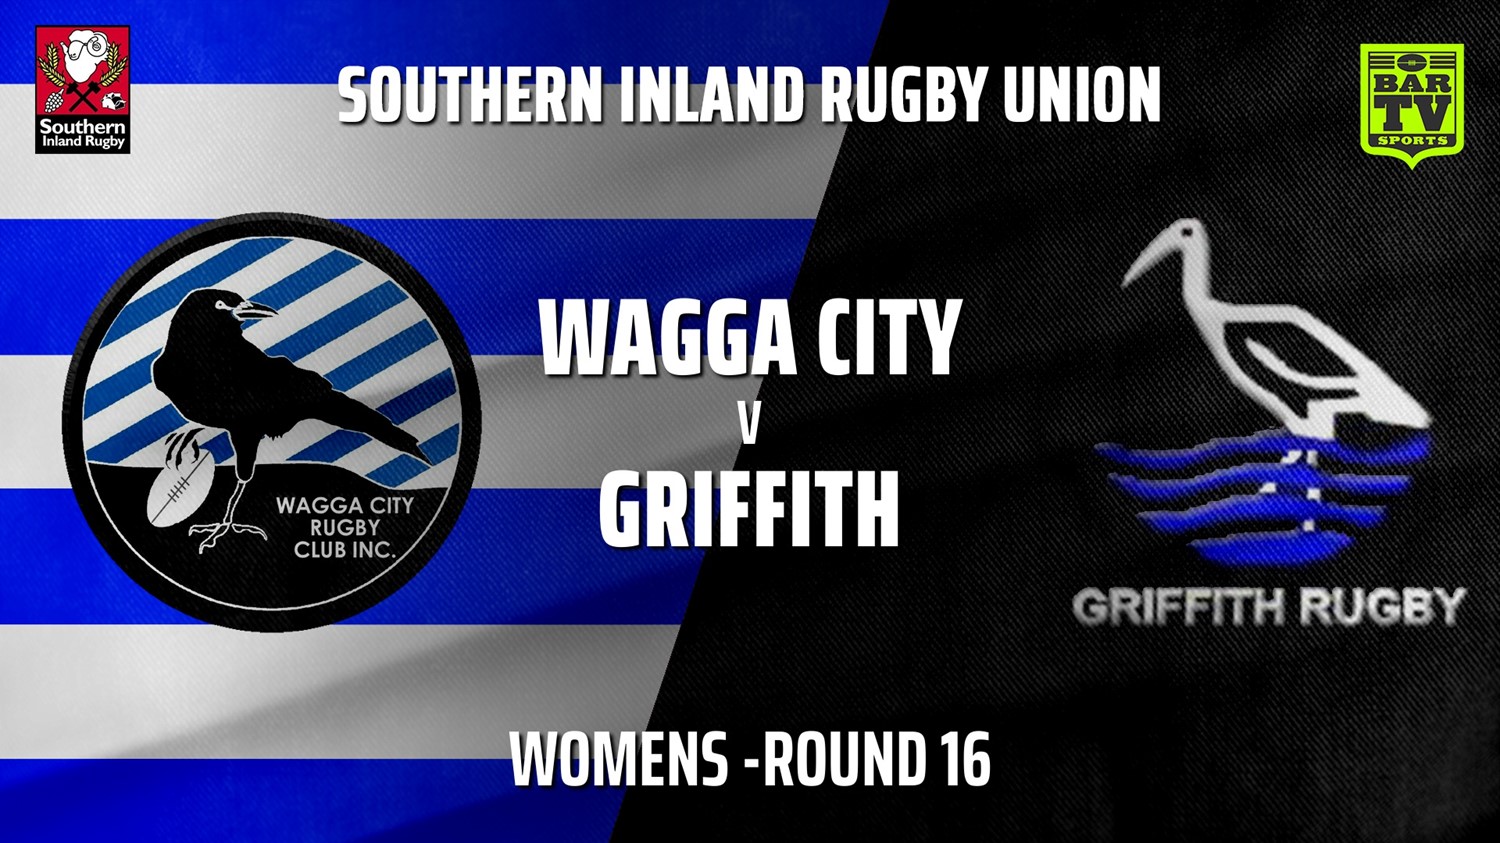 210731-Southern Inland Rugby Union 16 - Womens - Wagga City v Griffith Slate Image